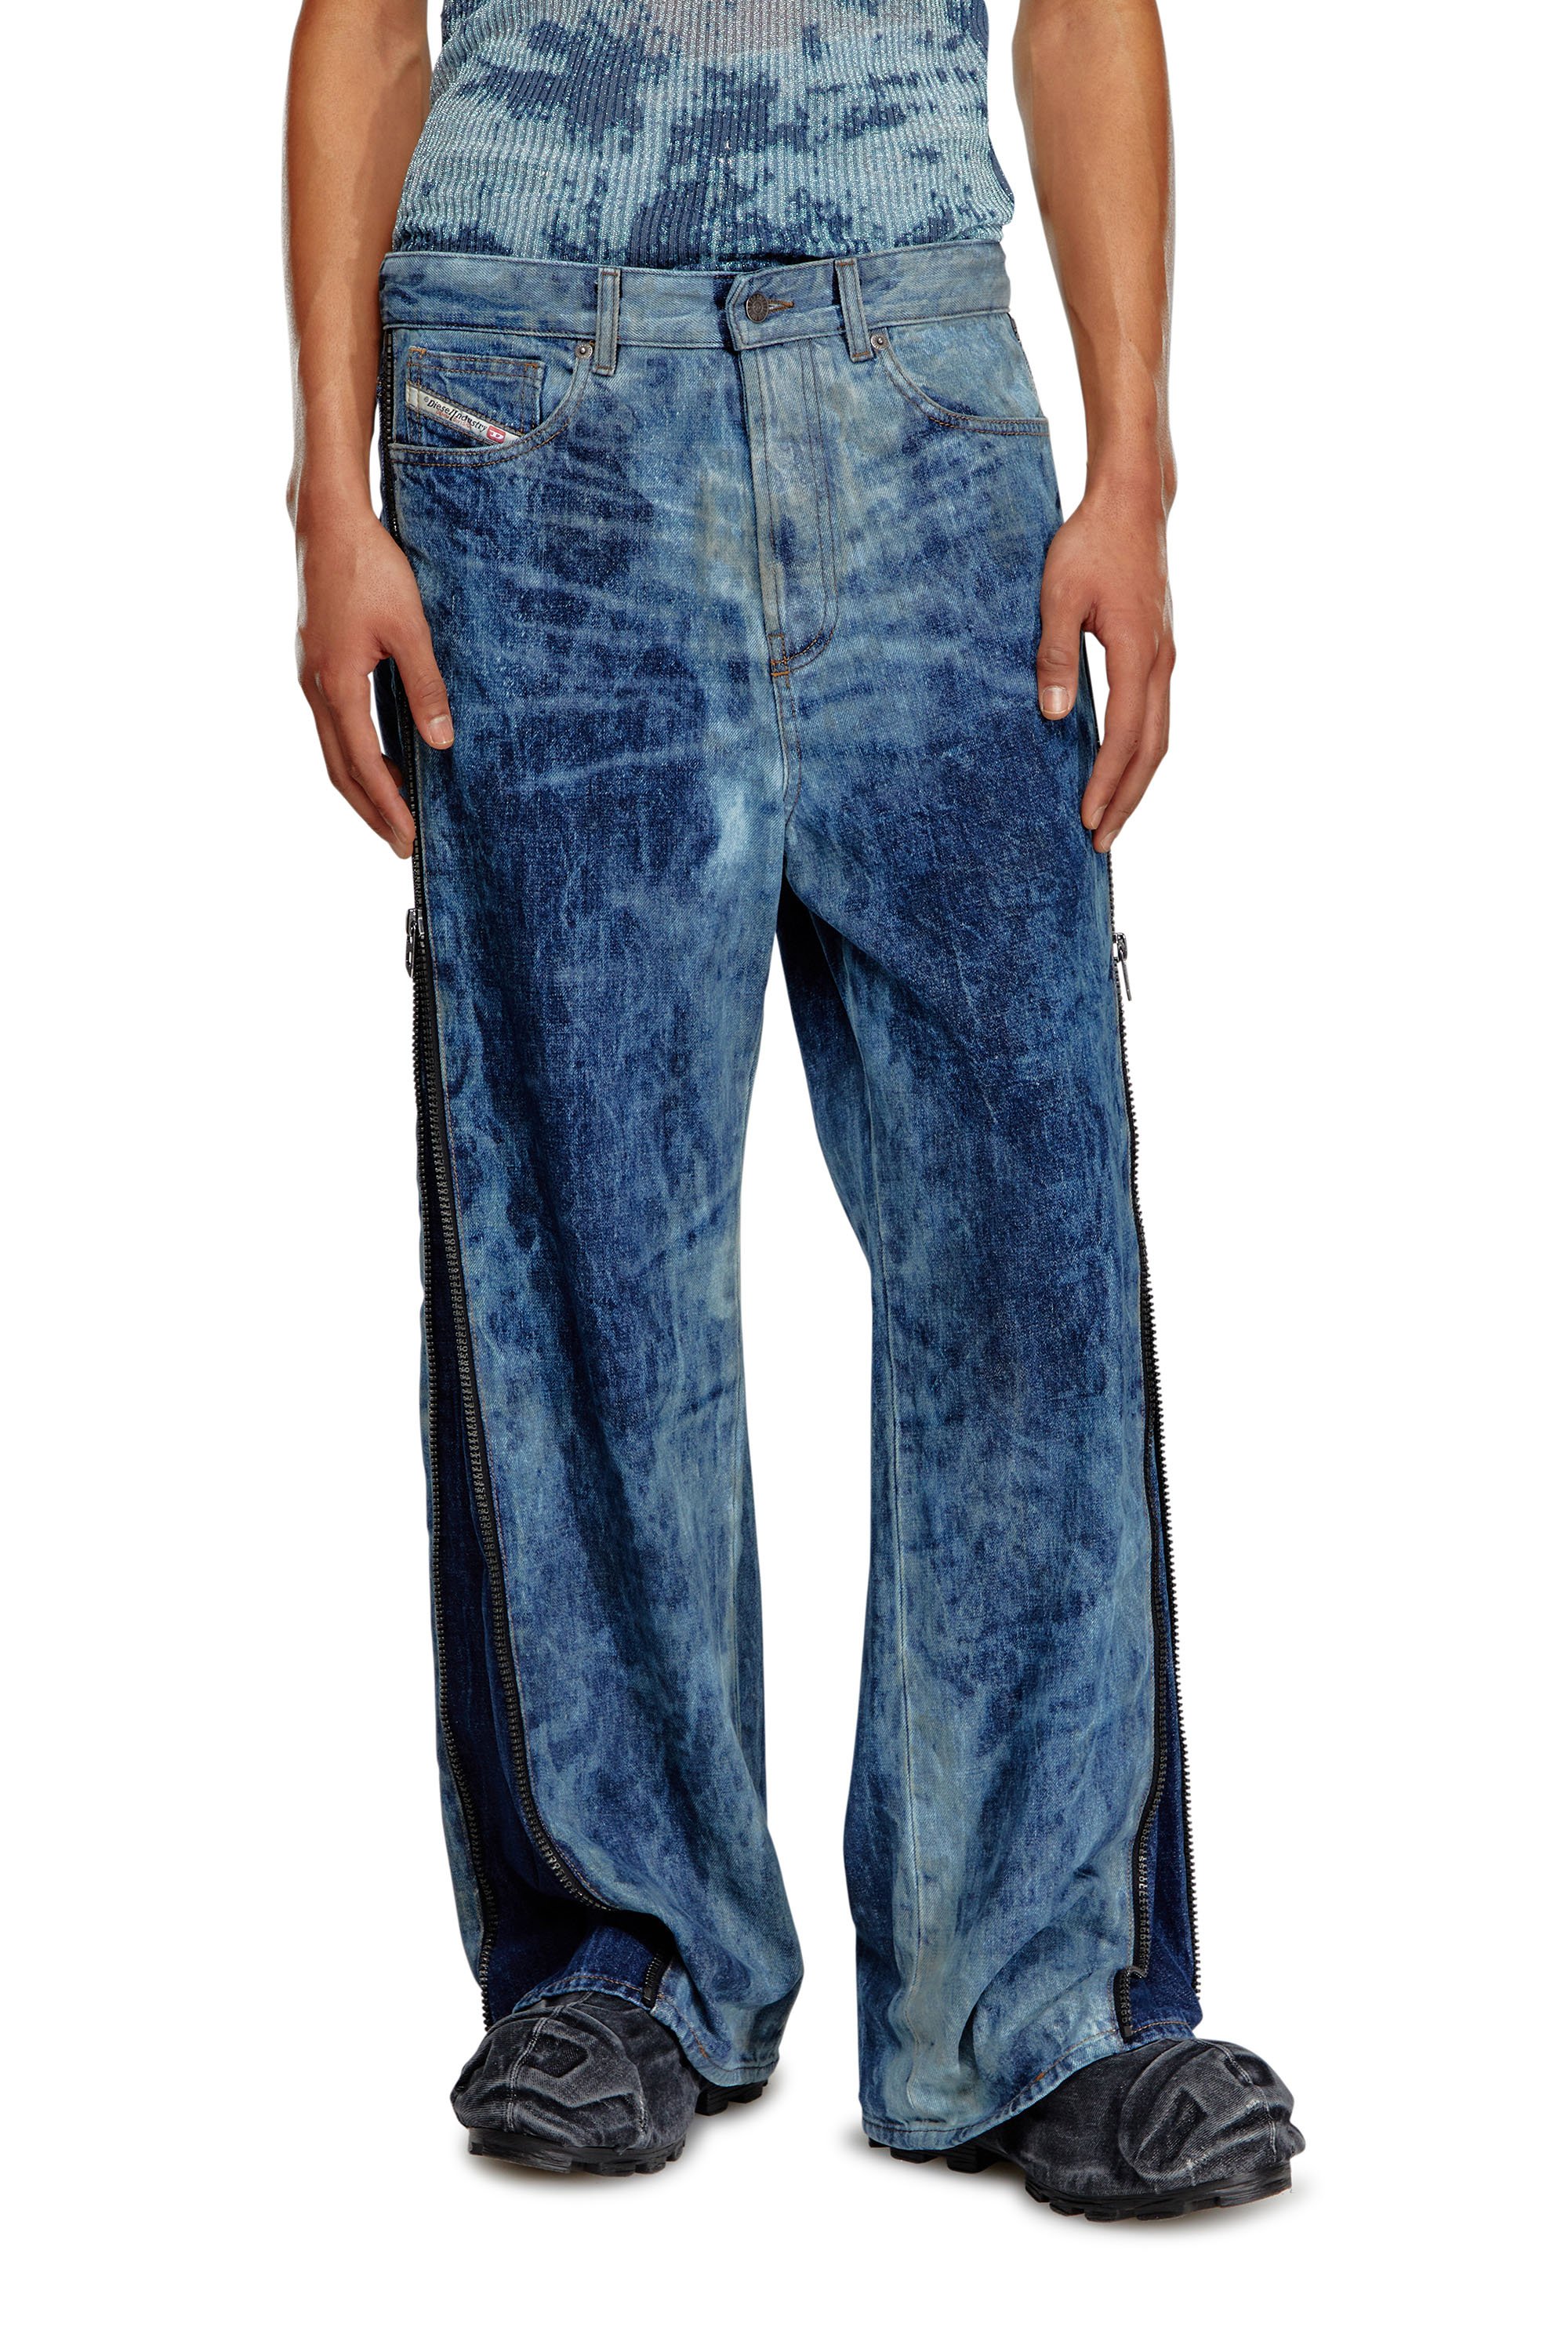 Diesel - Straight Jeans D-Rise 0PGAX, Hombre Straight Jeans - D-Rise in Azul marino - Image 2